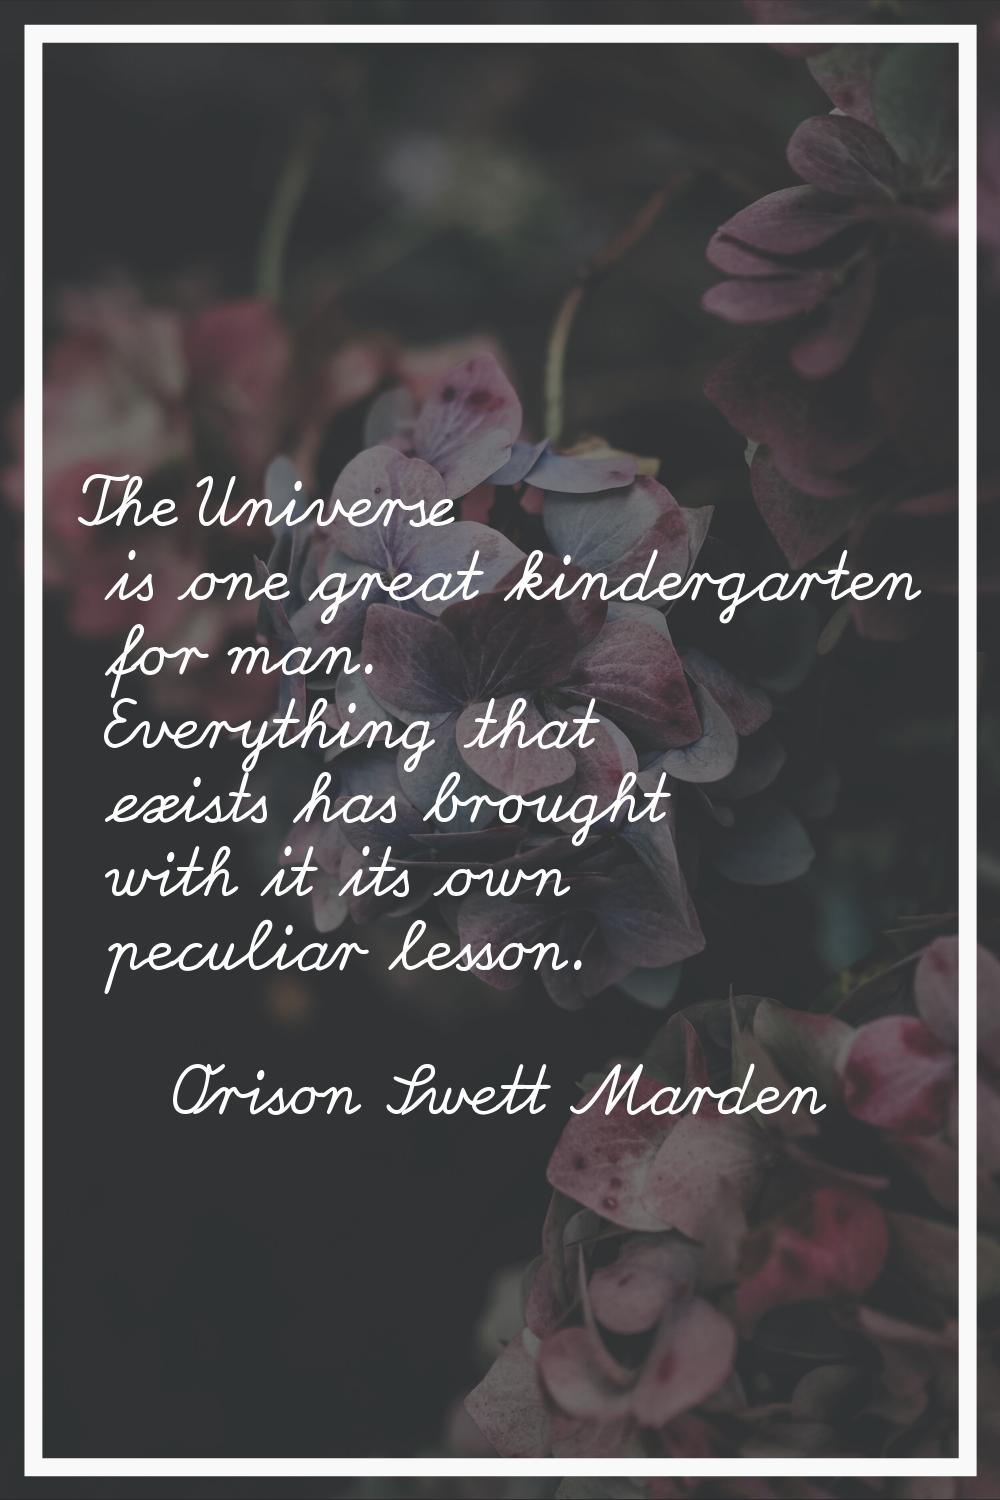 The Universe is one great kindergarten for man. Everything that exists has brought with it its own 